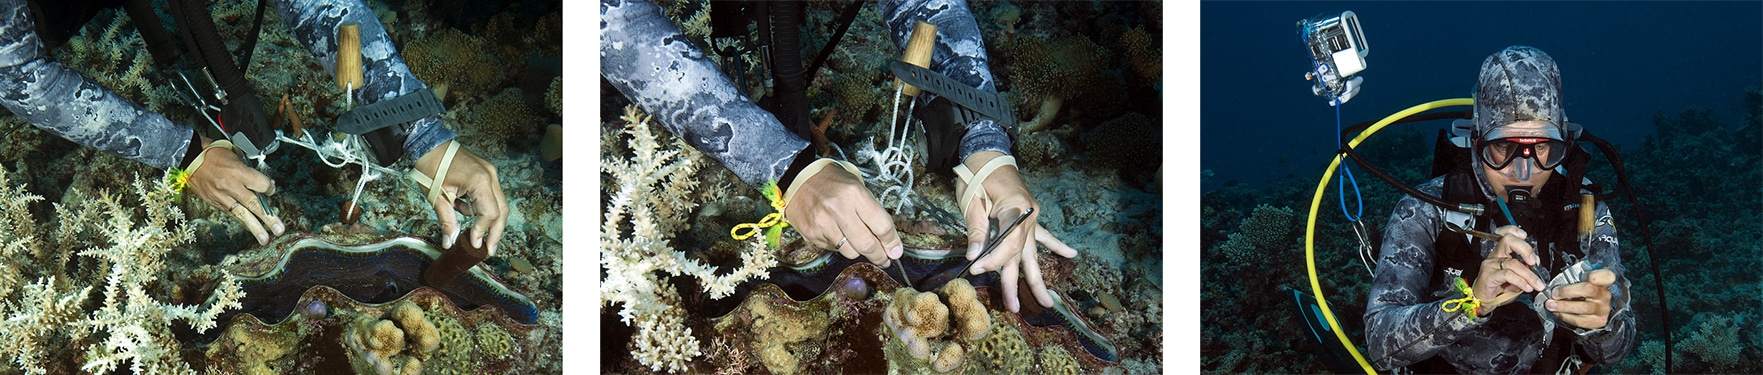 Cecilia Fauvelot collecting tissue samples from giant clams.